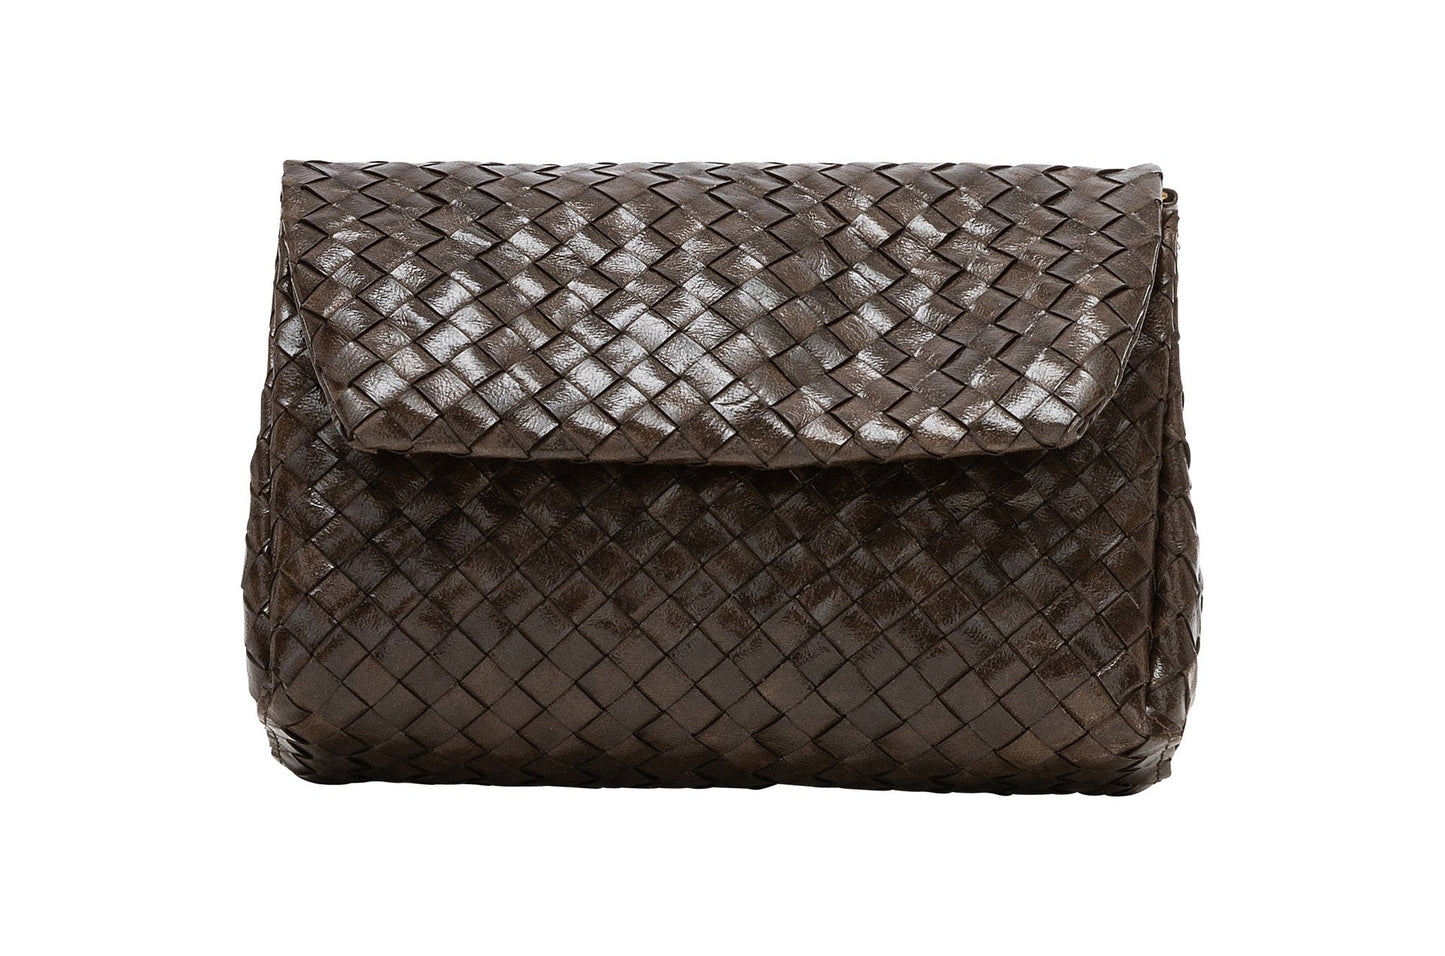 A woven washable paper handbag is shown. The bag has a front flap closure and a washable paper strap attached to the bag by metal clips. The bag is shown in brown.